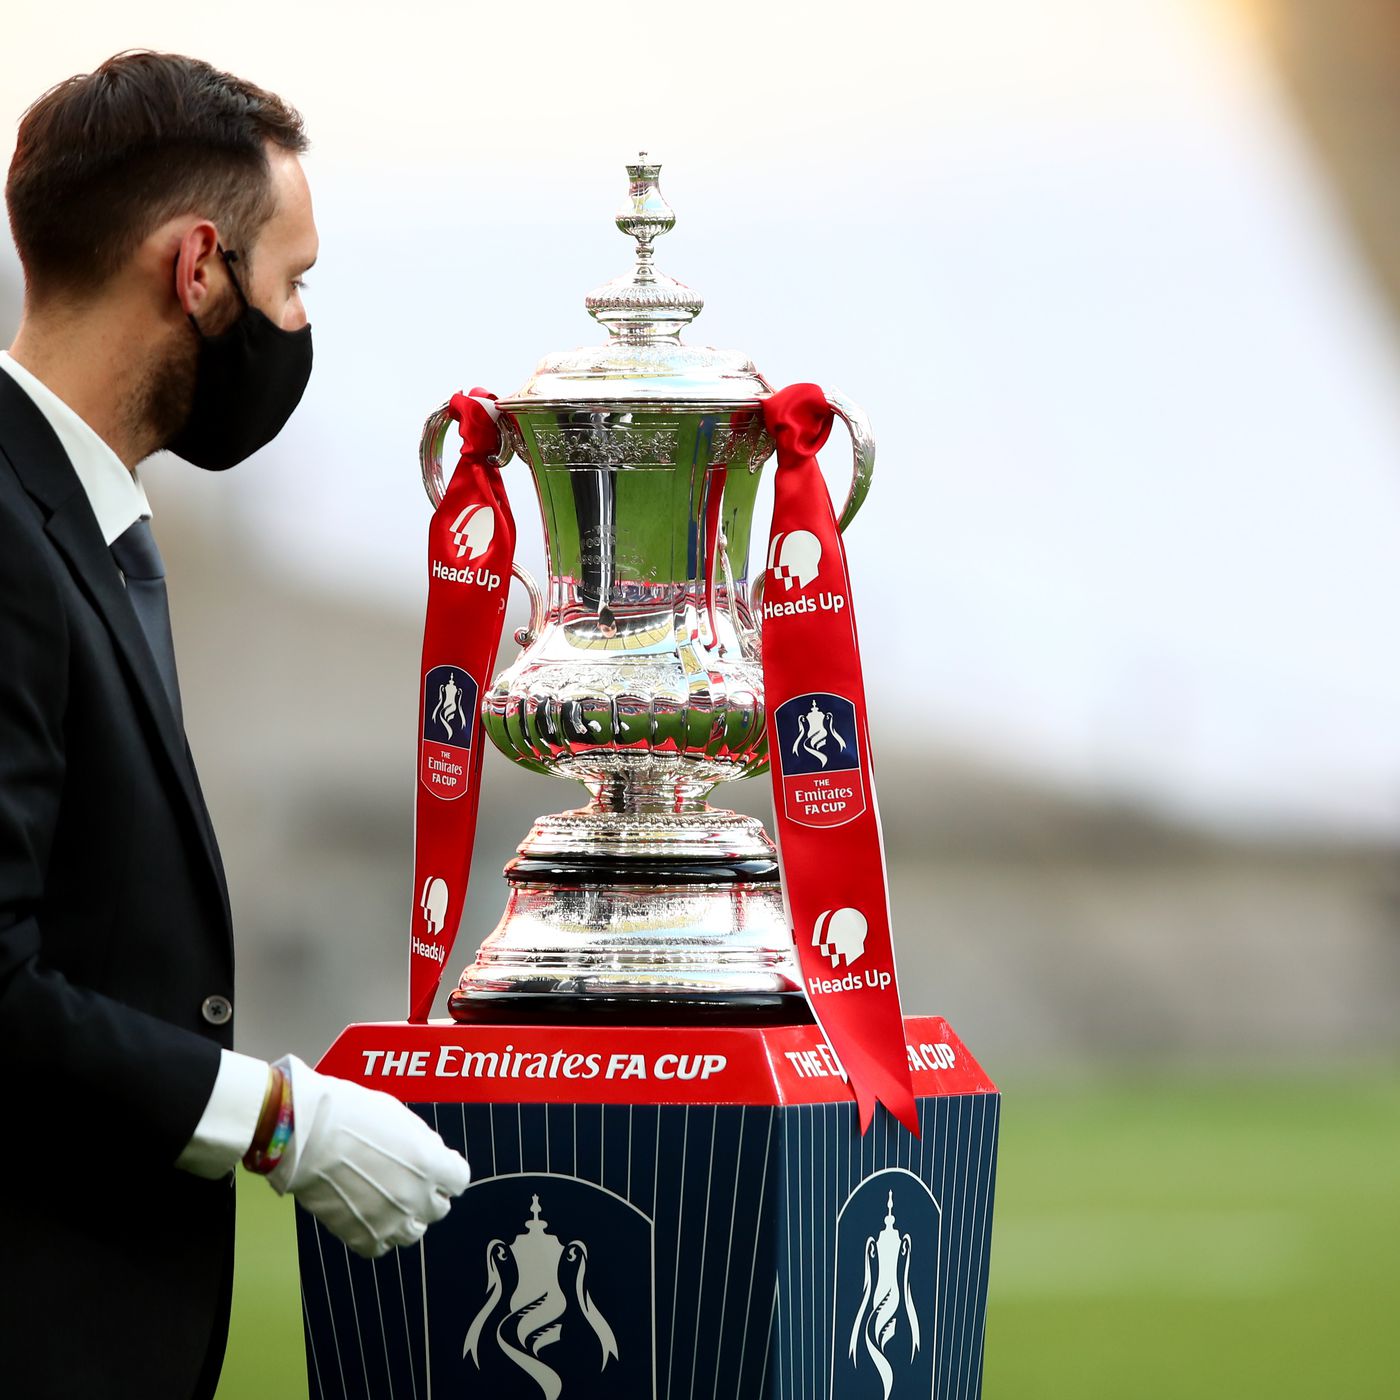 No FA Cup replays or two-leg Carabao Cup semifinals as Premier League confirms 2020-21 schedule - Cartilage Free Captain